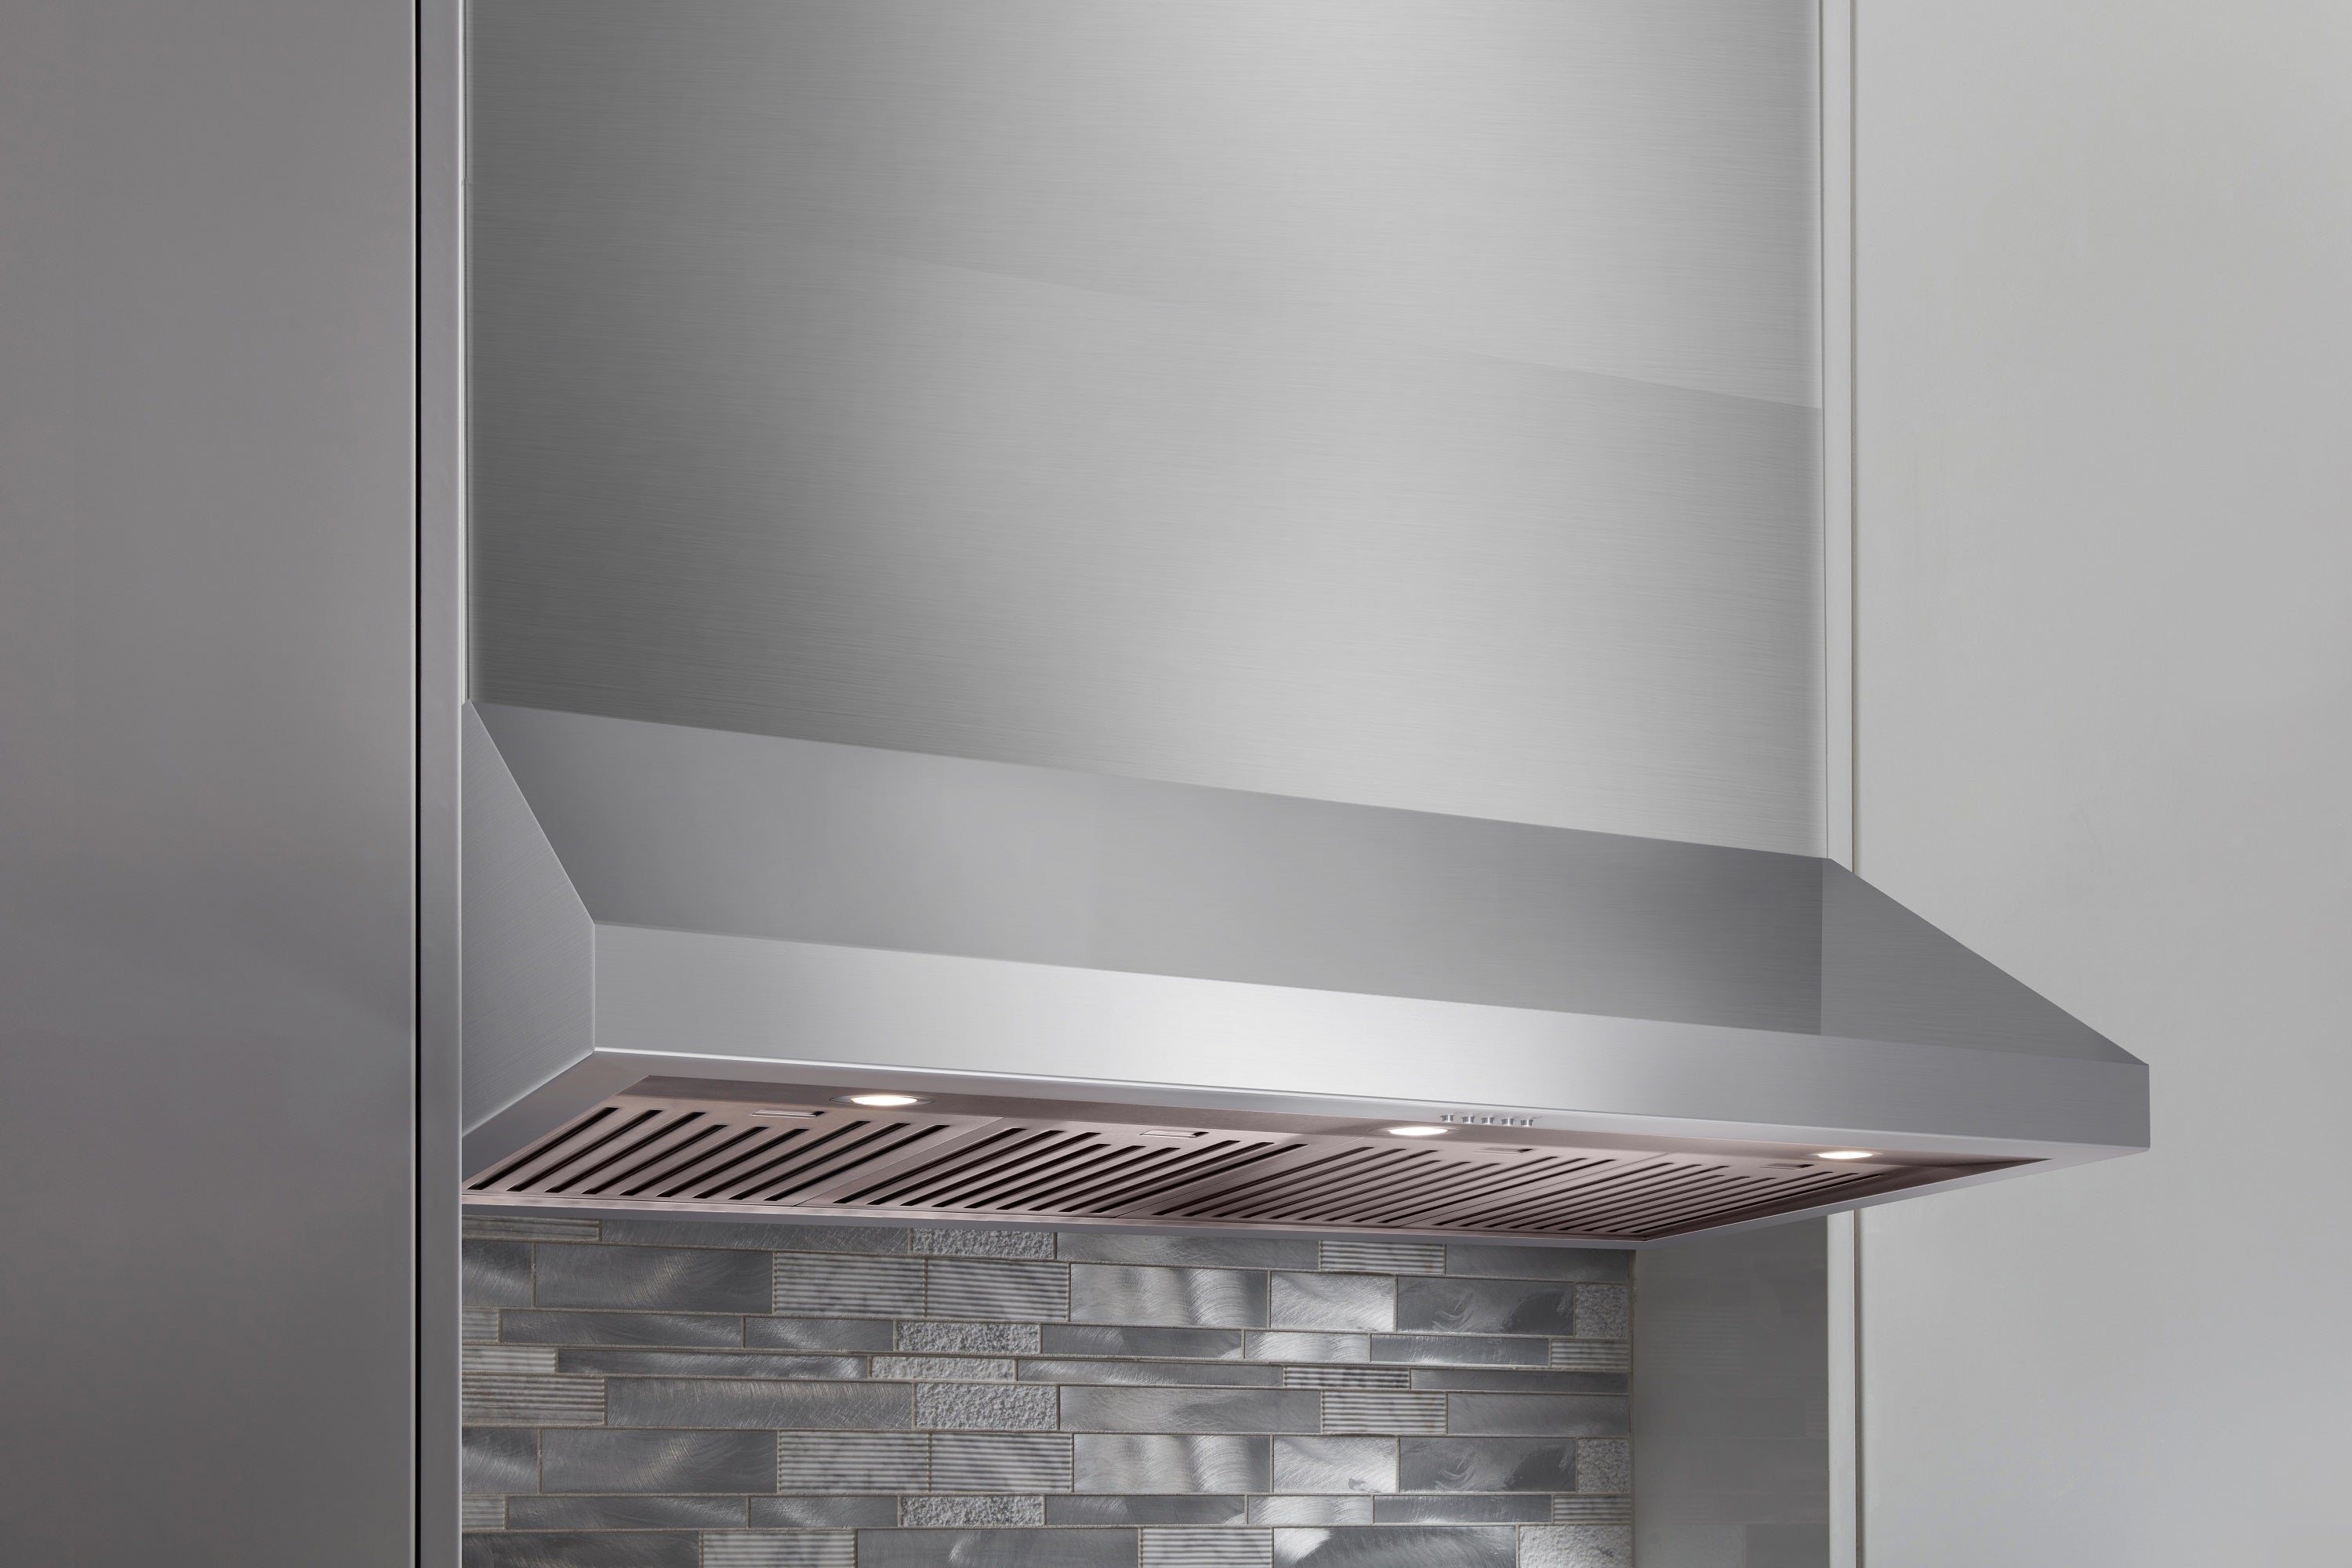 48" Professional Range Hood, 16.5 Inches Tall in Stainless Steel TRH4805 - RenoShop